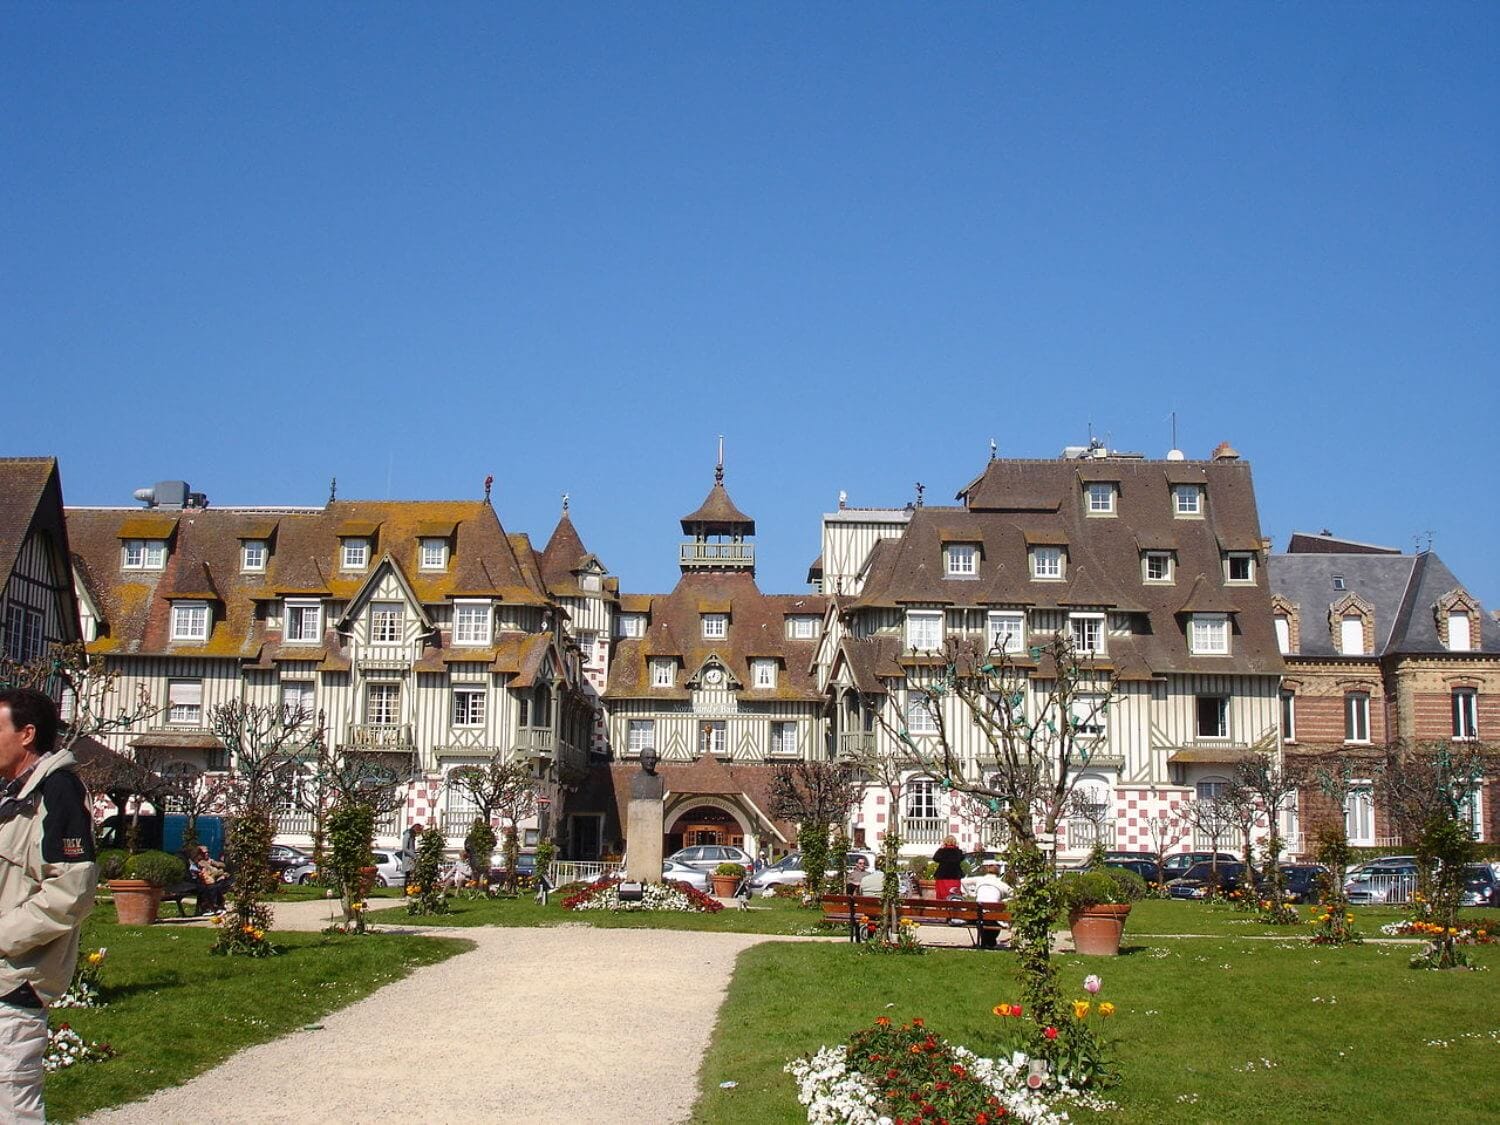 A man and a woman: Normandy Barrière Hotel in Deauville - Photo Wikimedia Commons by Pinpin